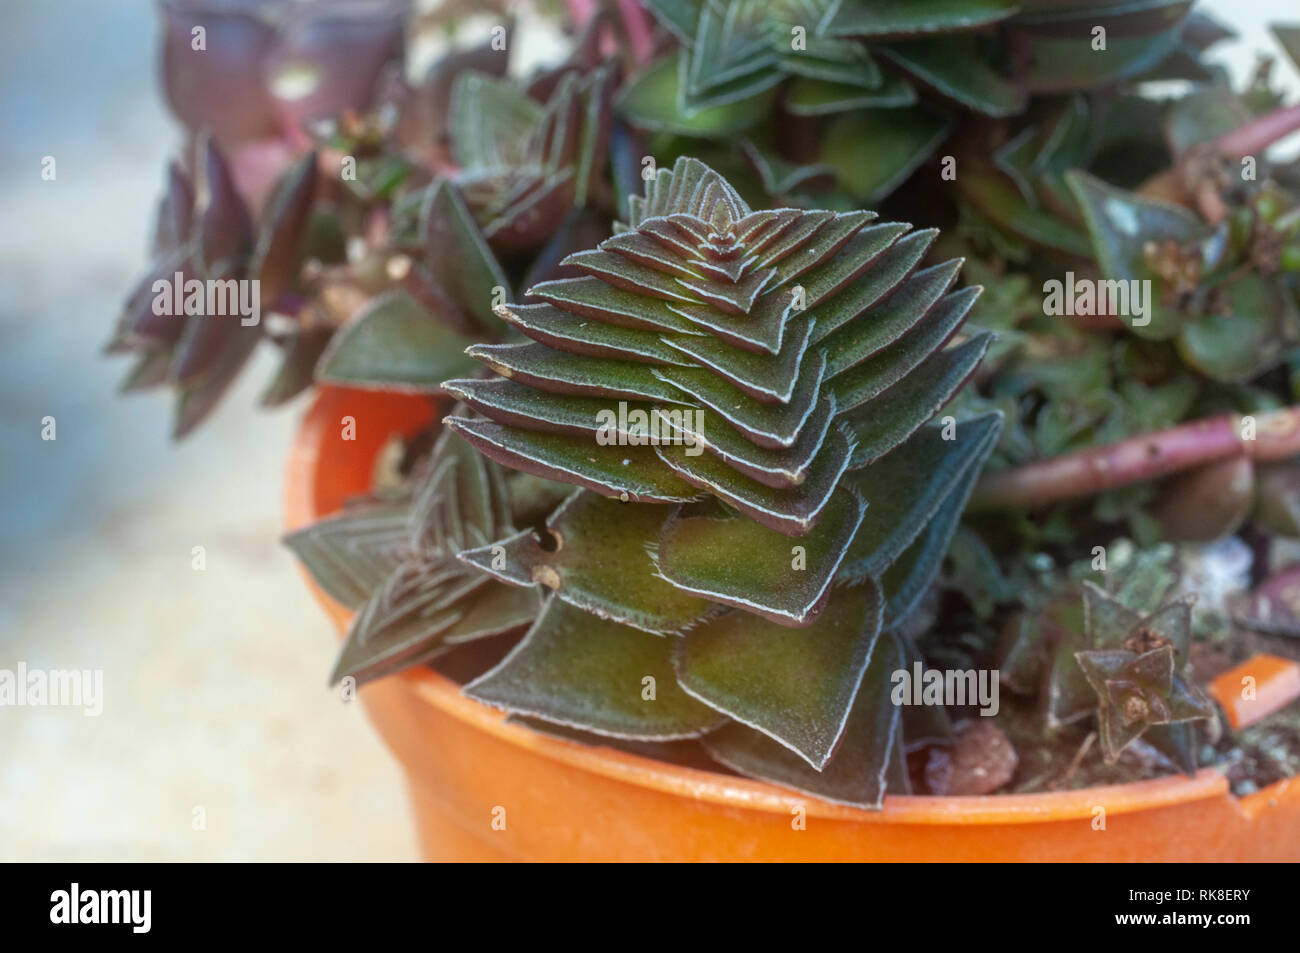 Compact form of Crassula capitella (Buddha's Temple) is a perennial succulent plant native to southern Africa. Photographed in Israel in January Stock Photo